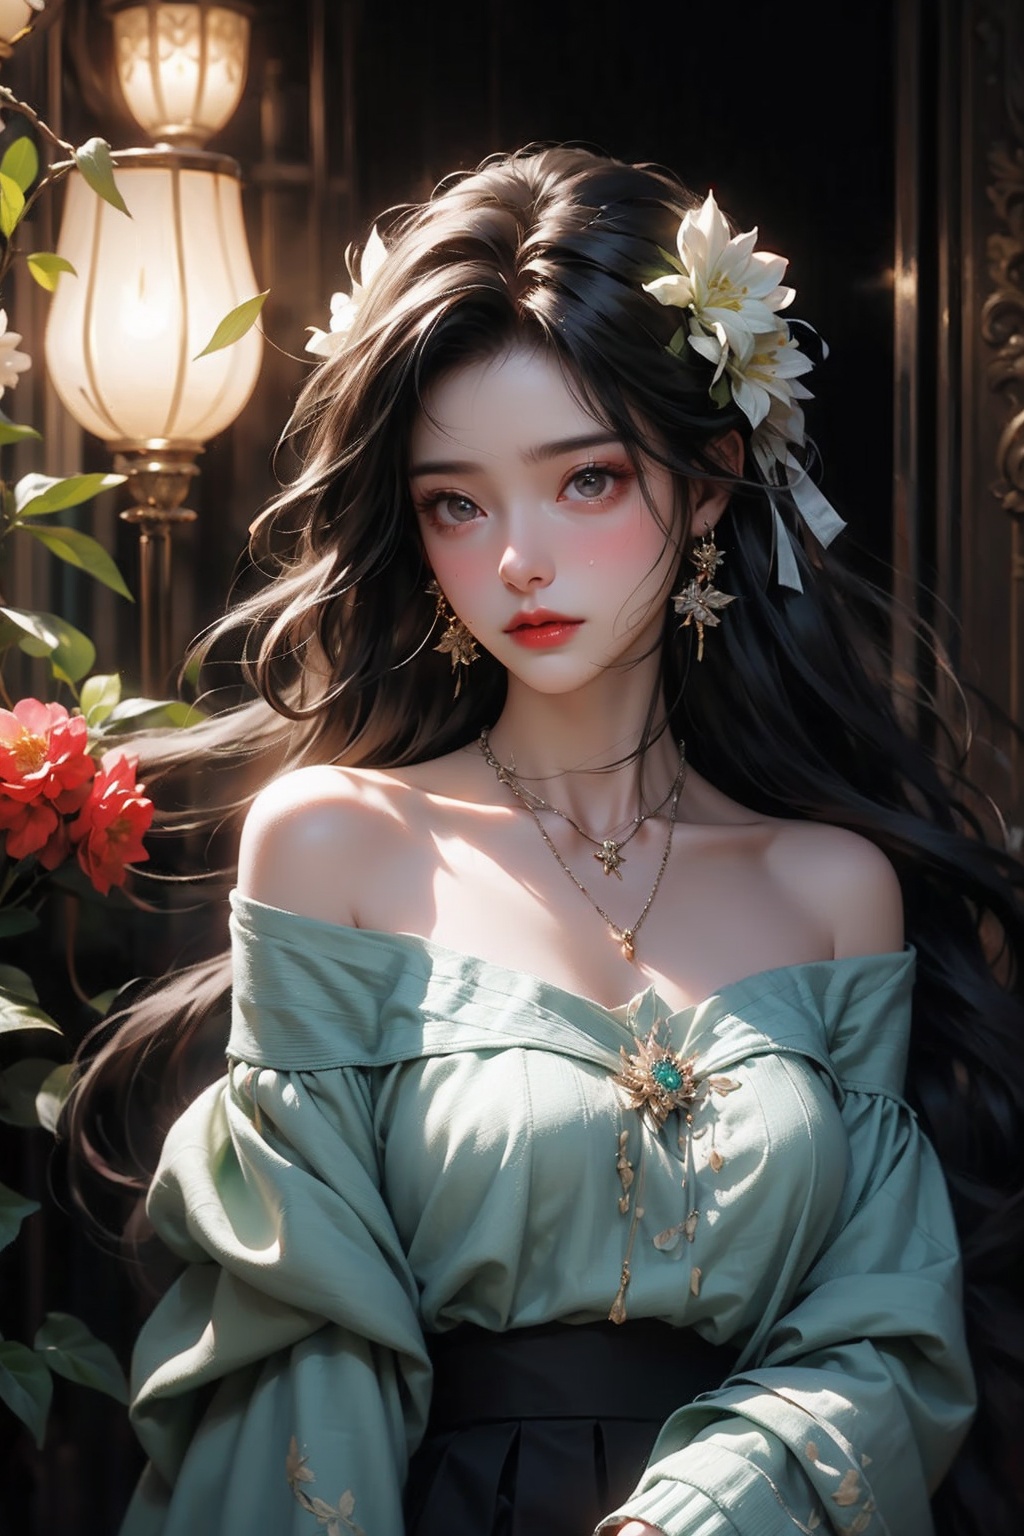 1 girl, jewelry, solo, earrings, long hair, forehead markings, black hair, necklace, bare shoulders, flowers, red lips, hair flowers, upper body, skirt, off shoulder, facial markings, head down, makeup, lips, candles, collarbones, long sleeves, tears streaming down, crying, Tyndall effect, 8k, large aperture, masterpiece of the century, sit, maple leaf, doorway, corridor, Sun on face,